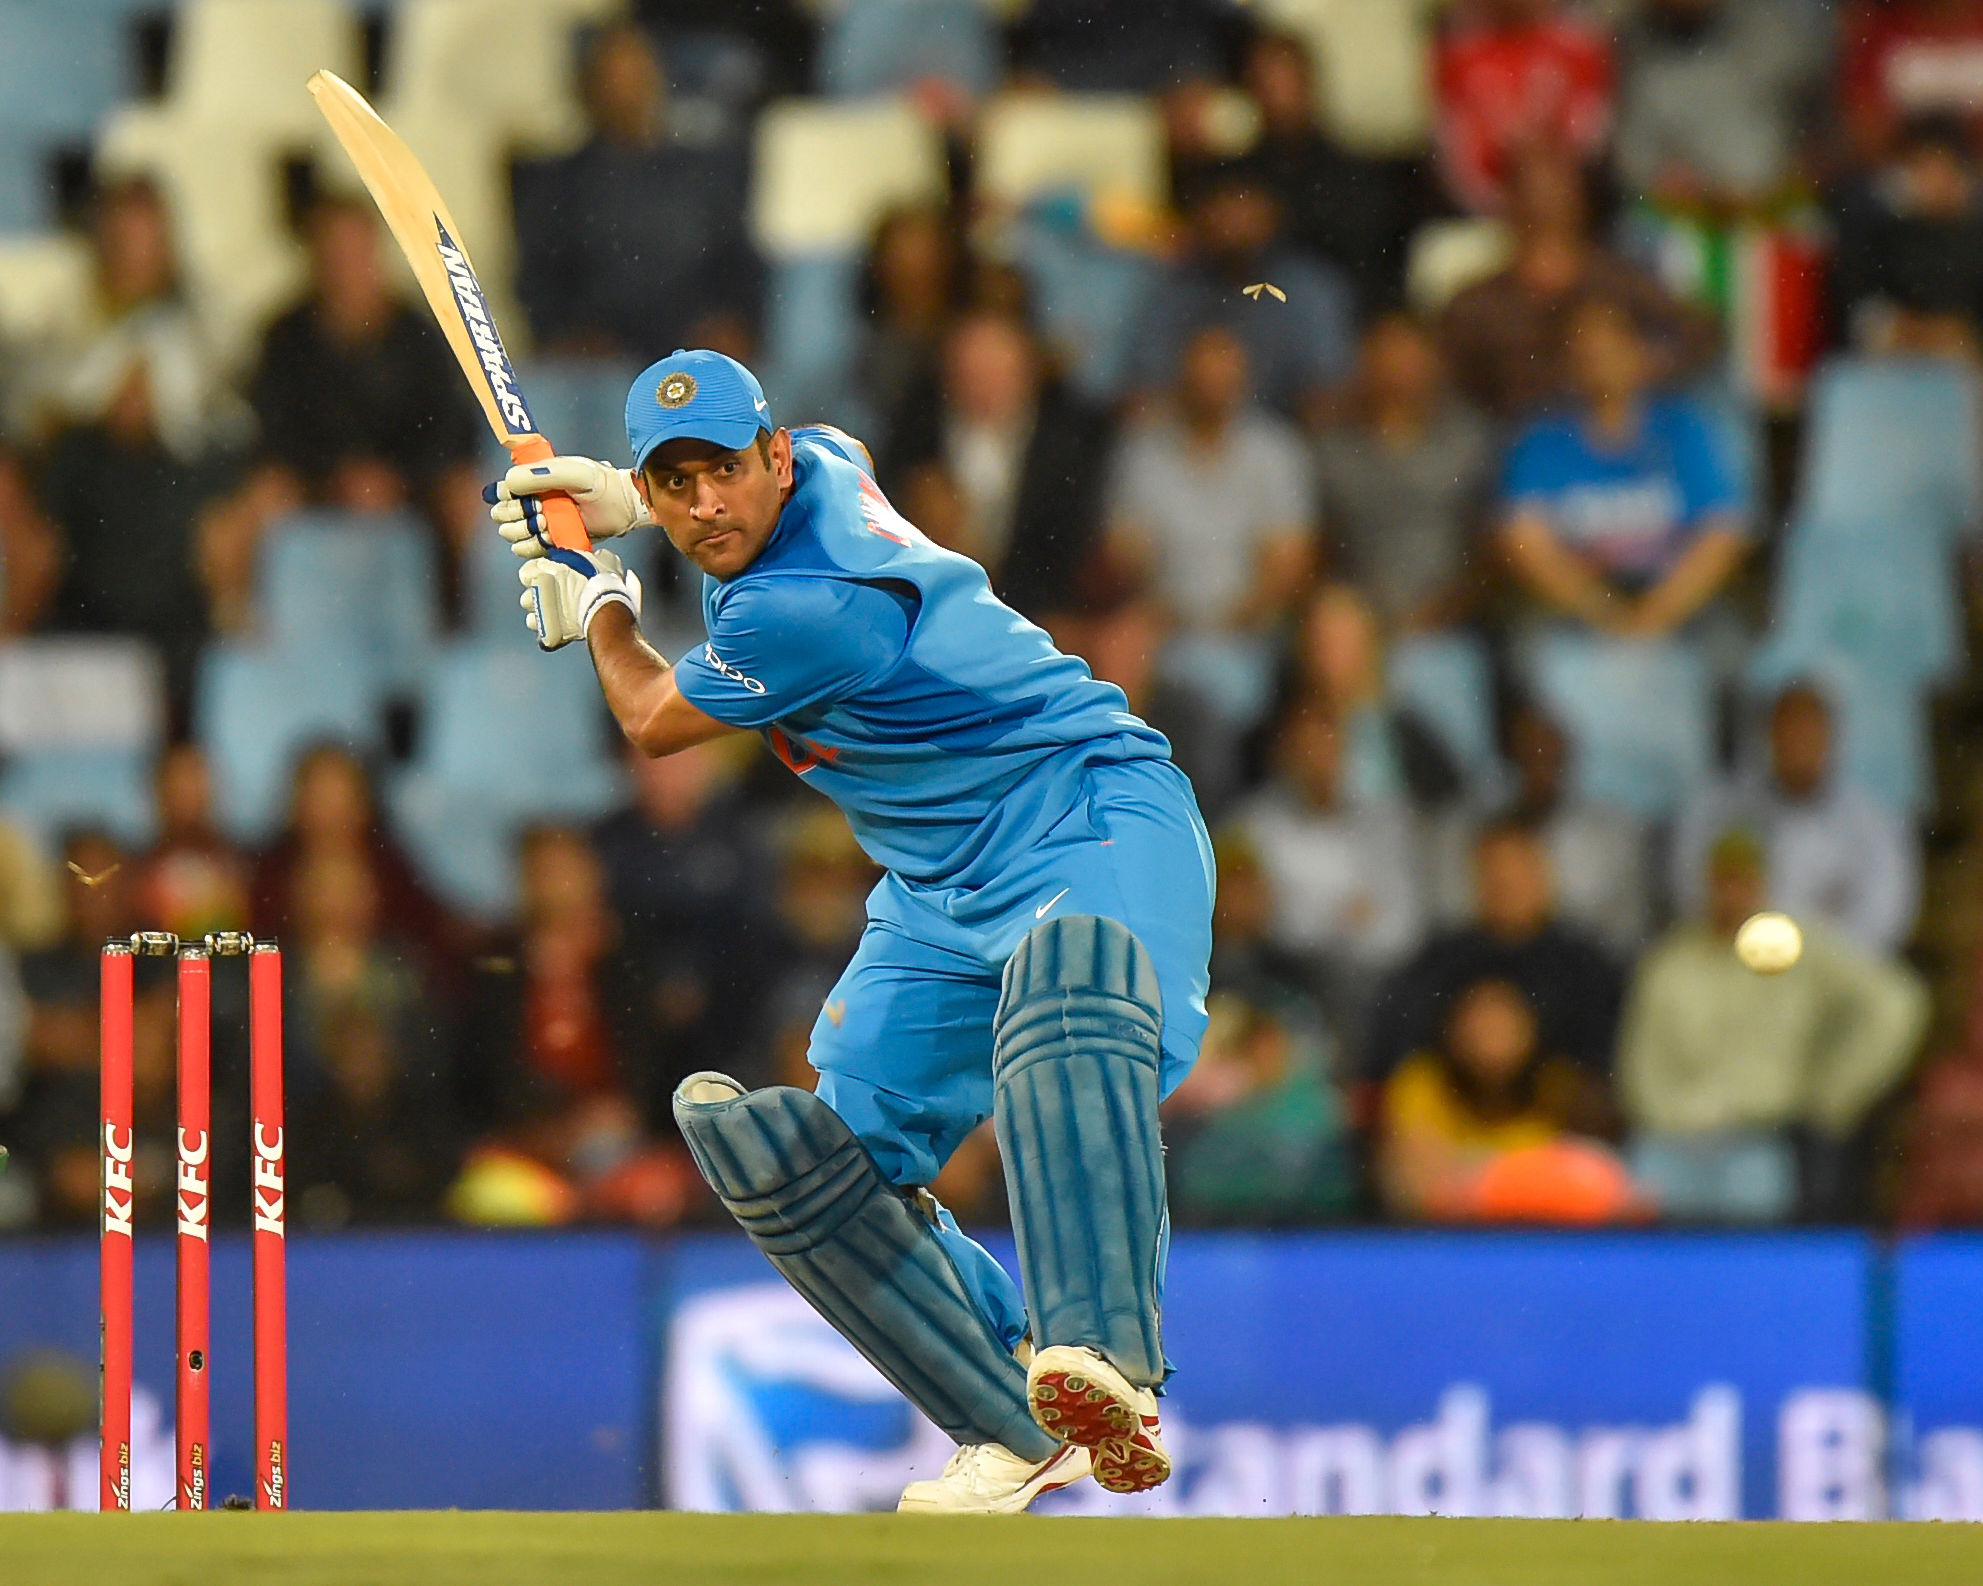 MS Dhoni’s ‘skill and character’ missed by India during run chases: Michael Holding